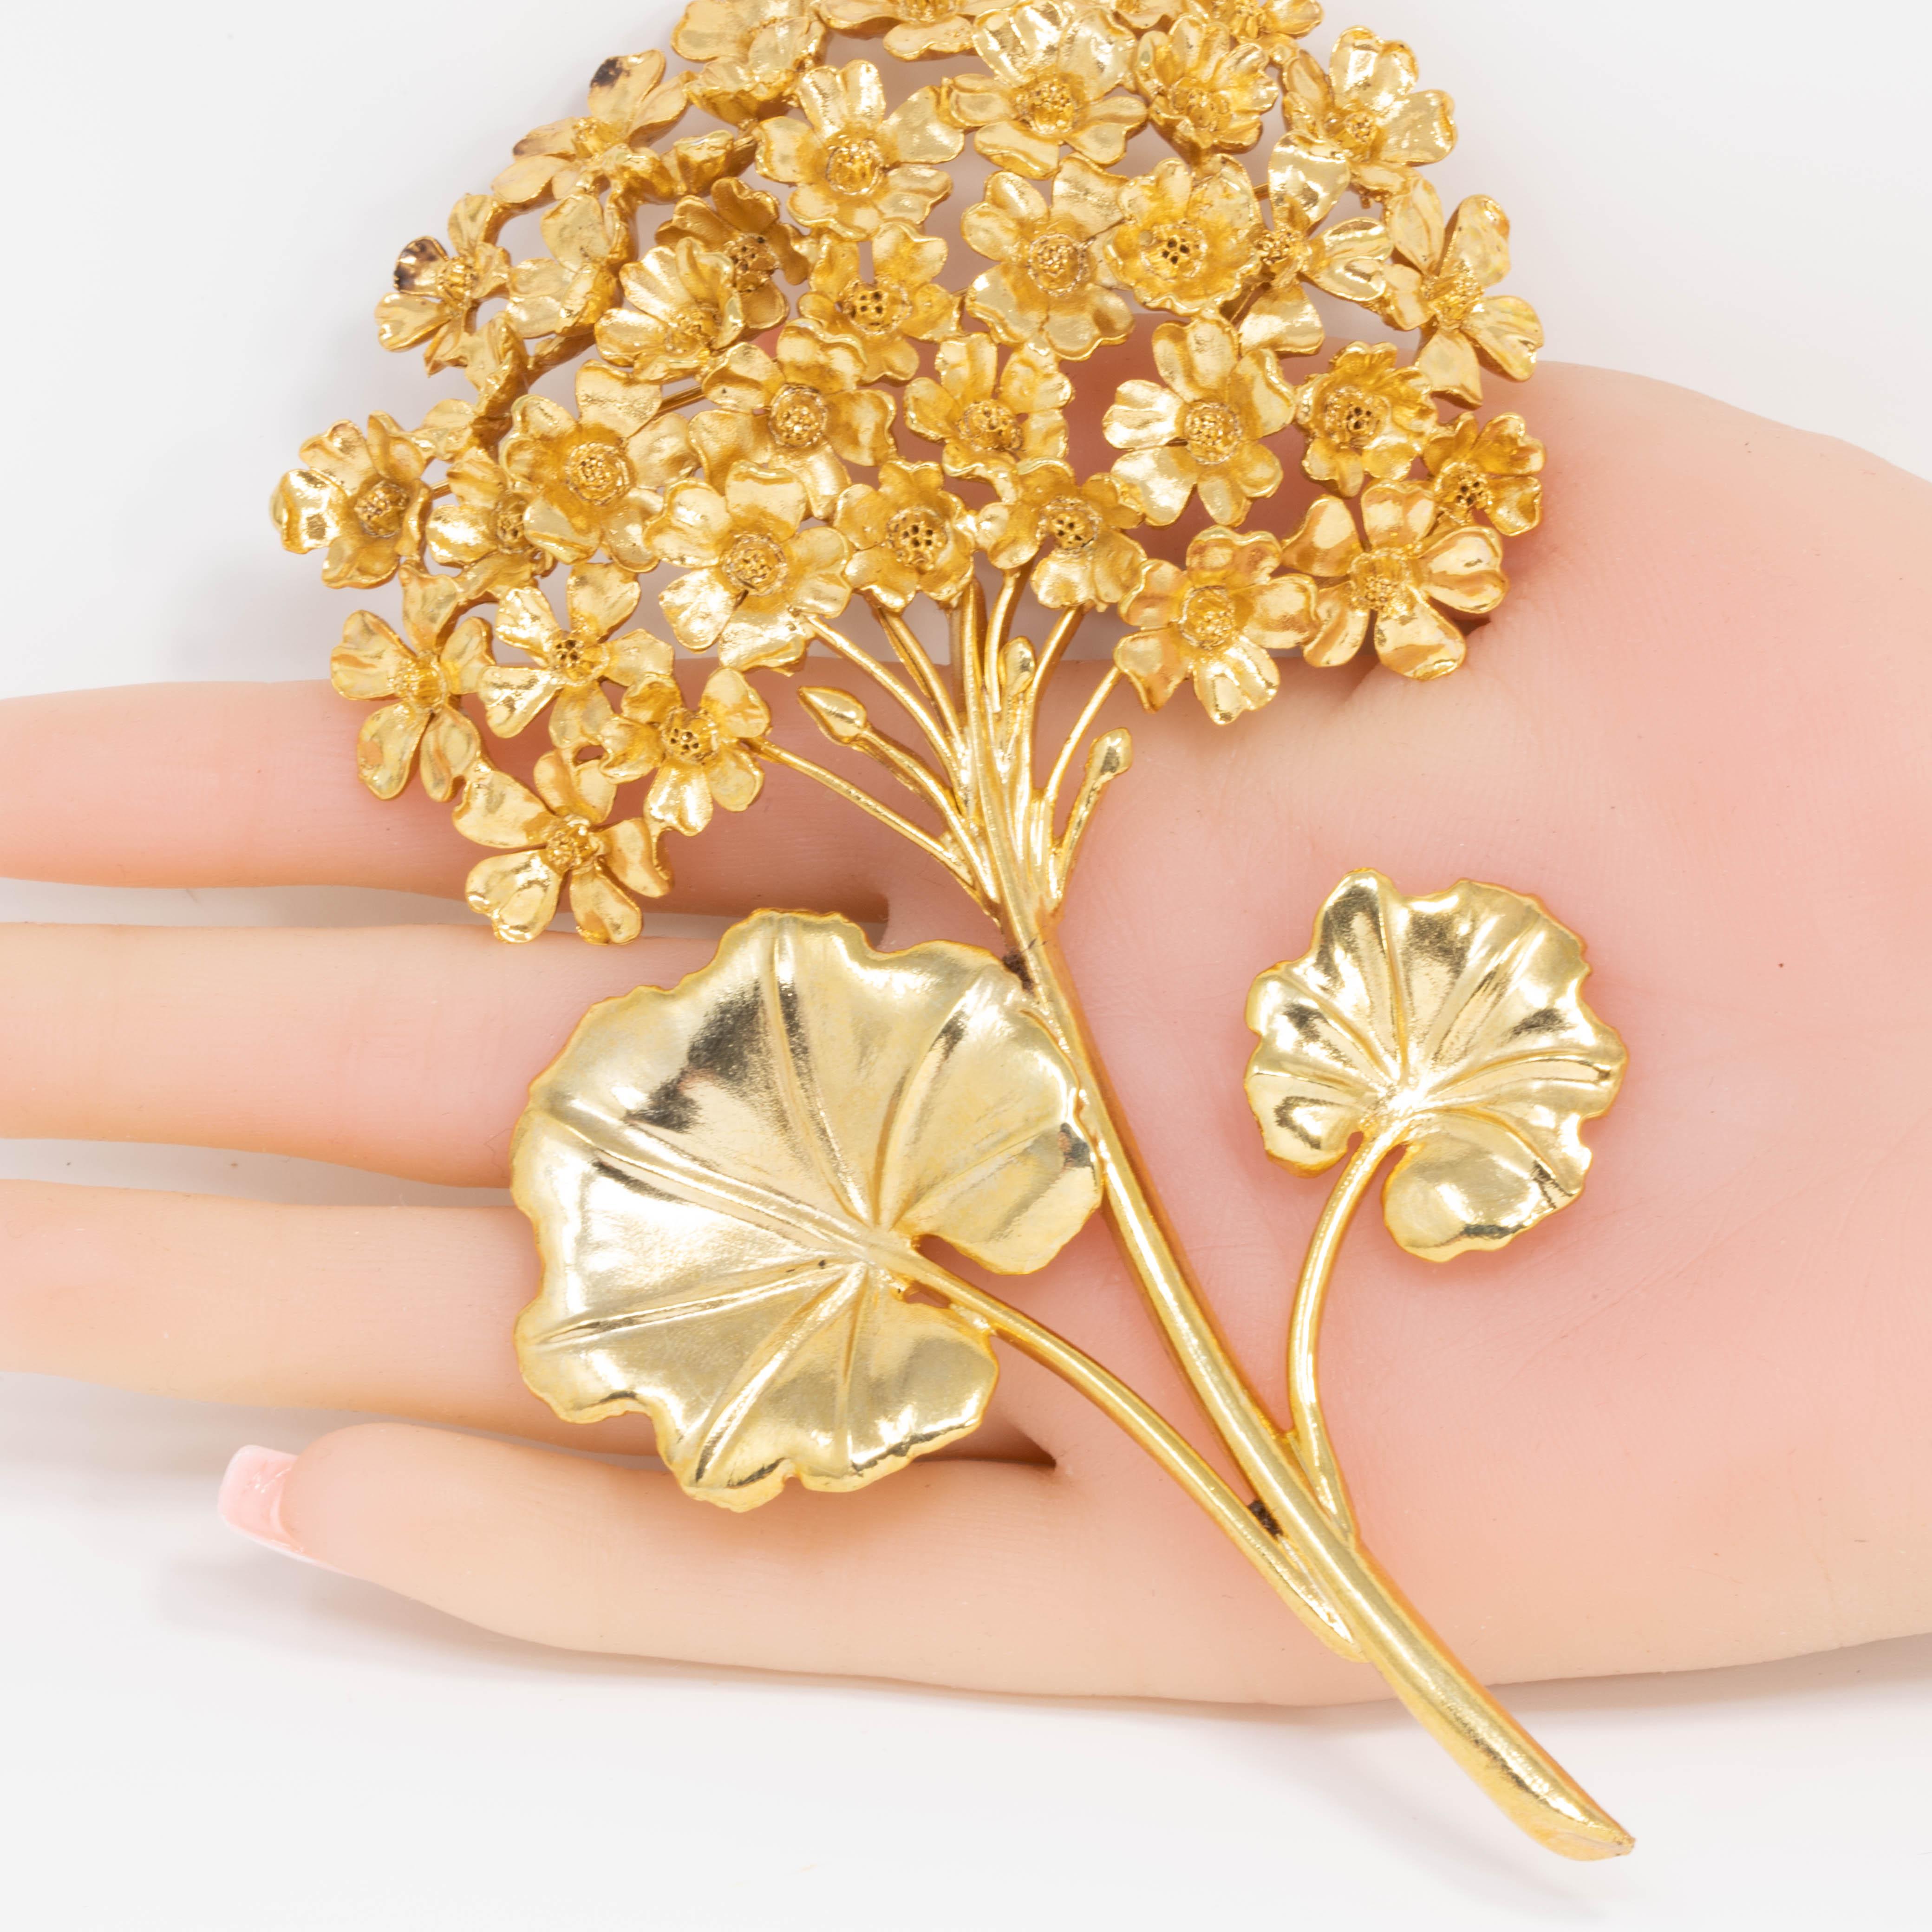 Crafted into a bouquet of gold-tone geranium flowers, this gleaming pin brooch will be an elegant finishing touch on any lapel.

22KT gold plated.

Tags, Marks, Hallmarks: Oscar de la Renta, Made in USA